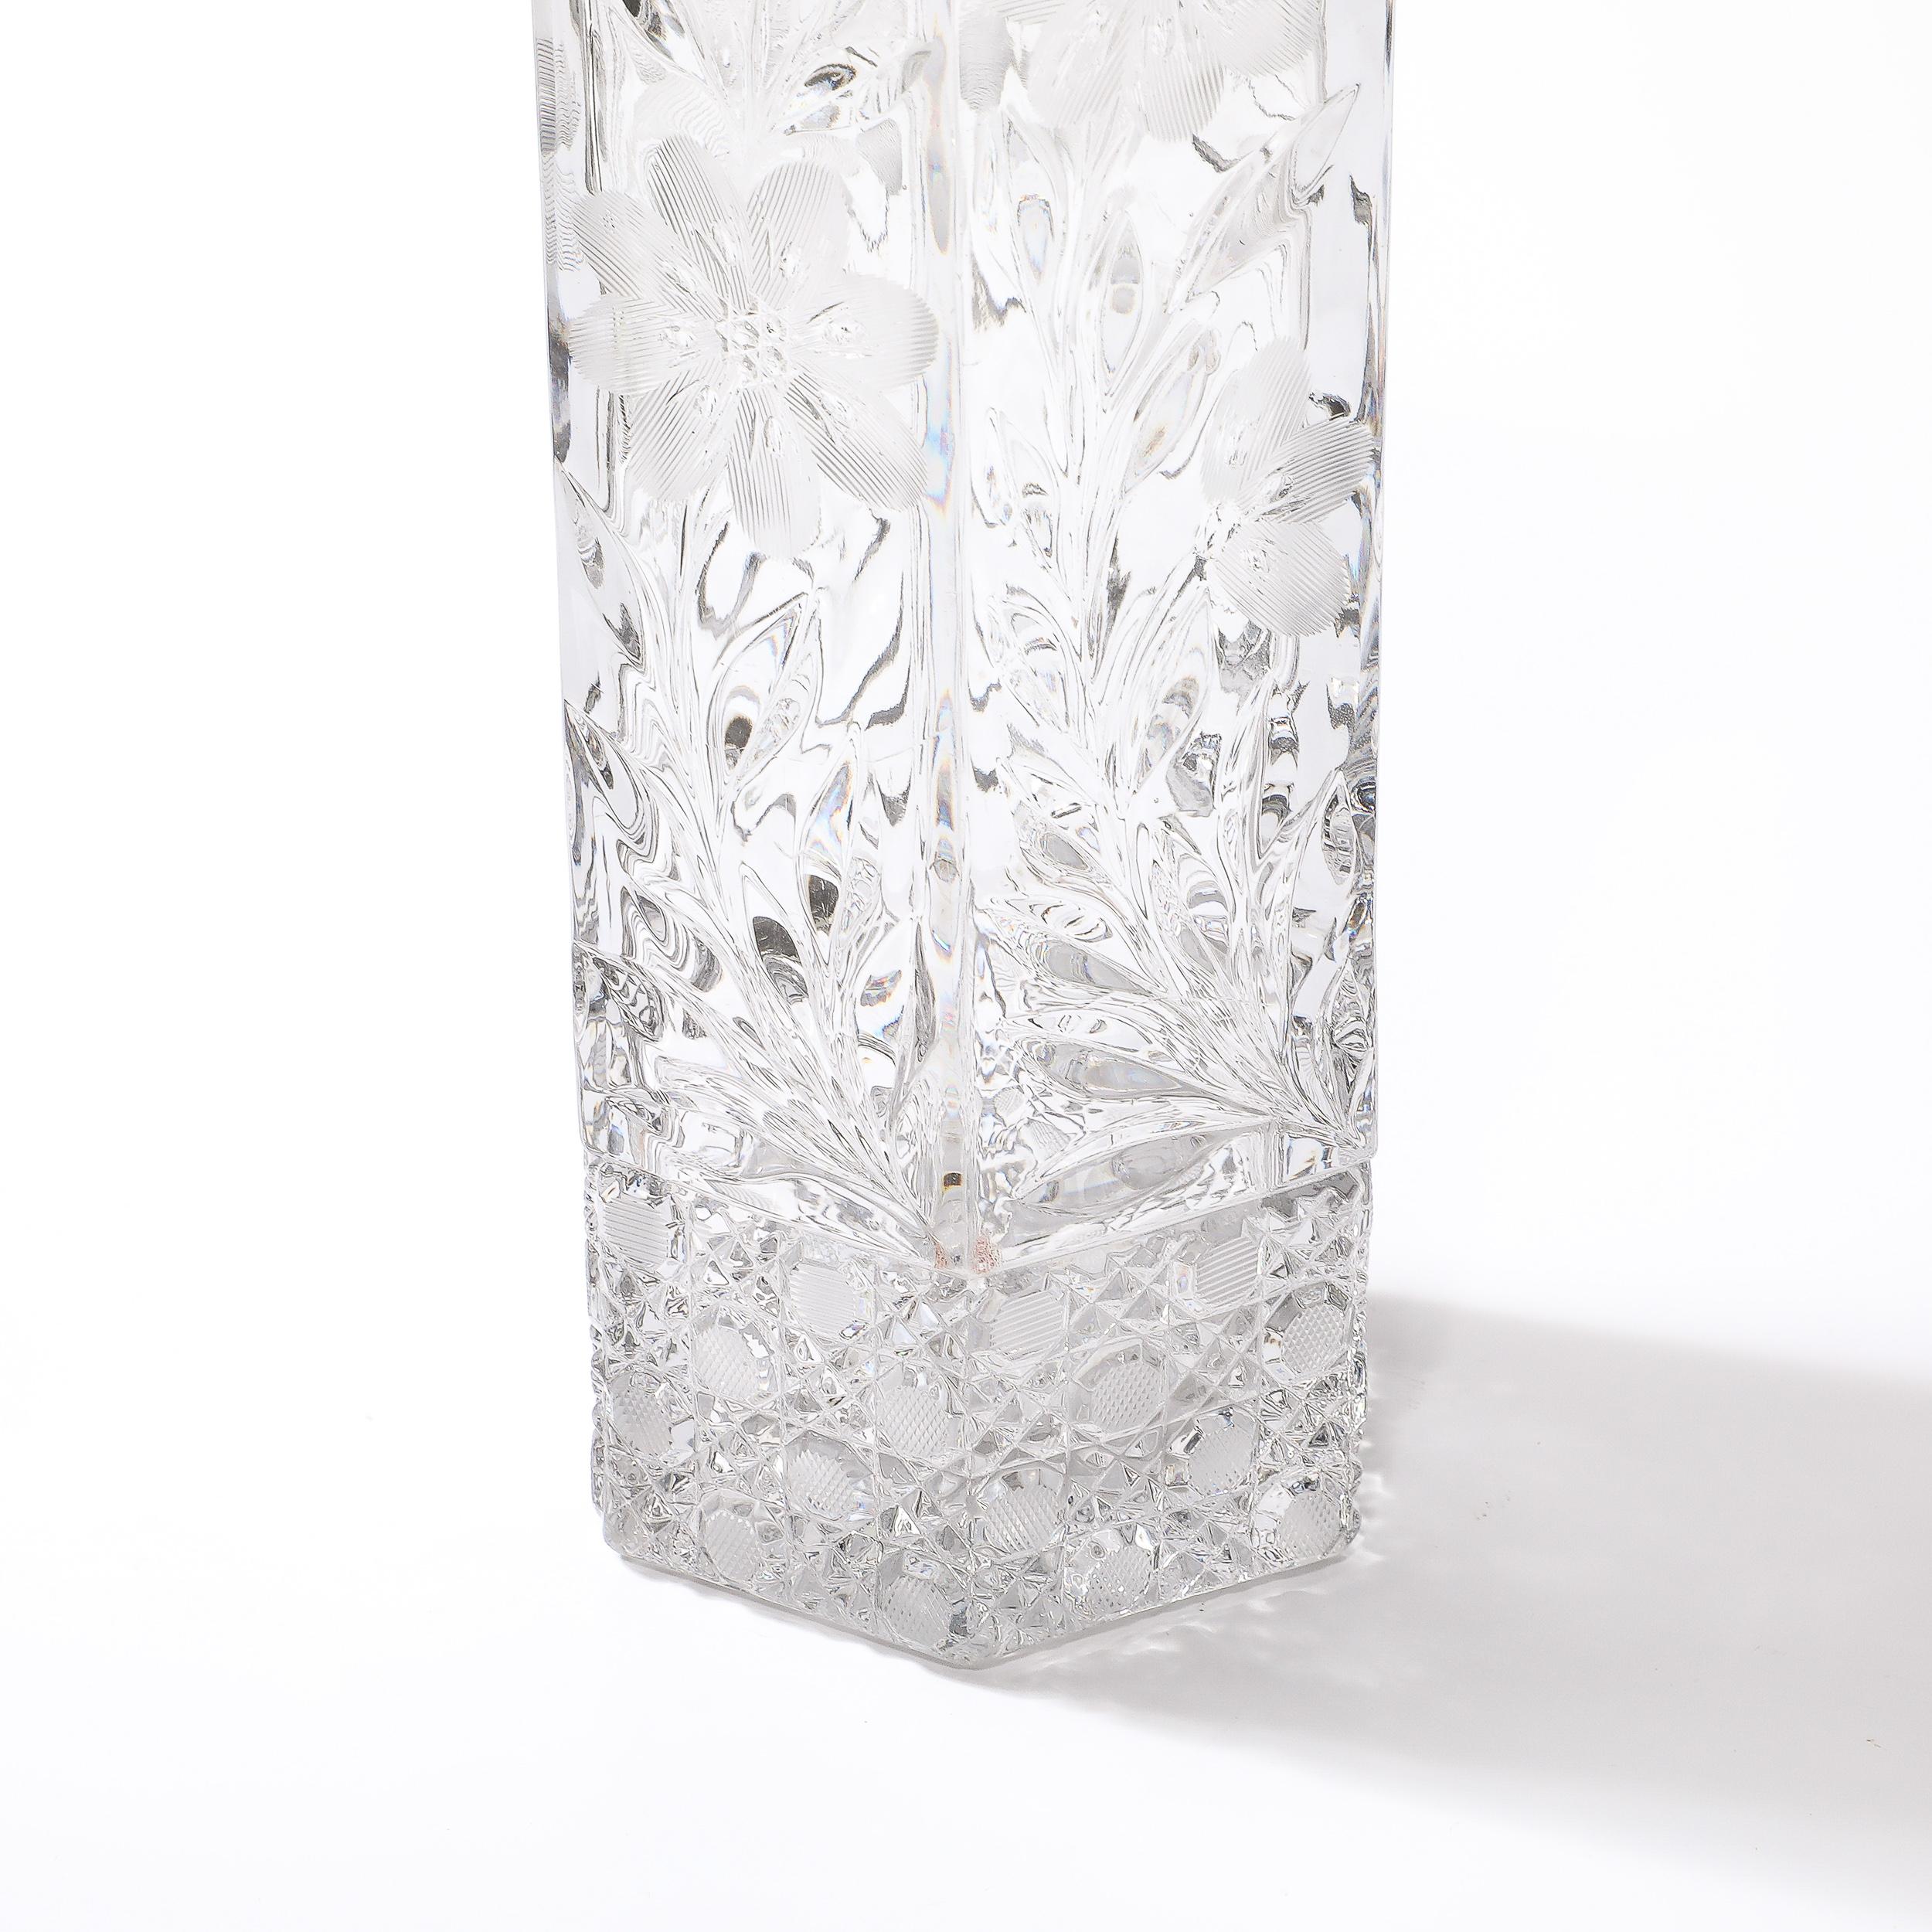 Early 20th Century Art Deco Harvard Pattern Octagonal Cut Crystal Vase w/ Floral & Geometric Detail For Sale